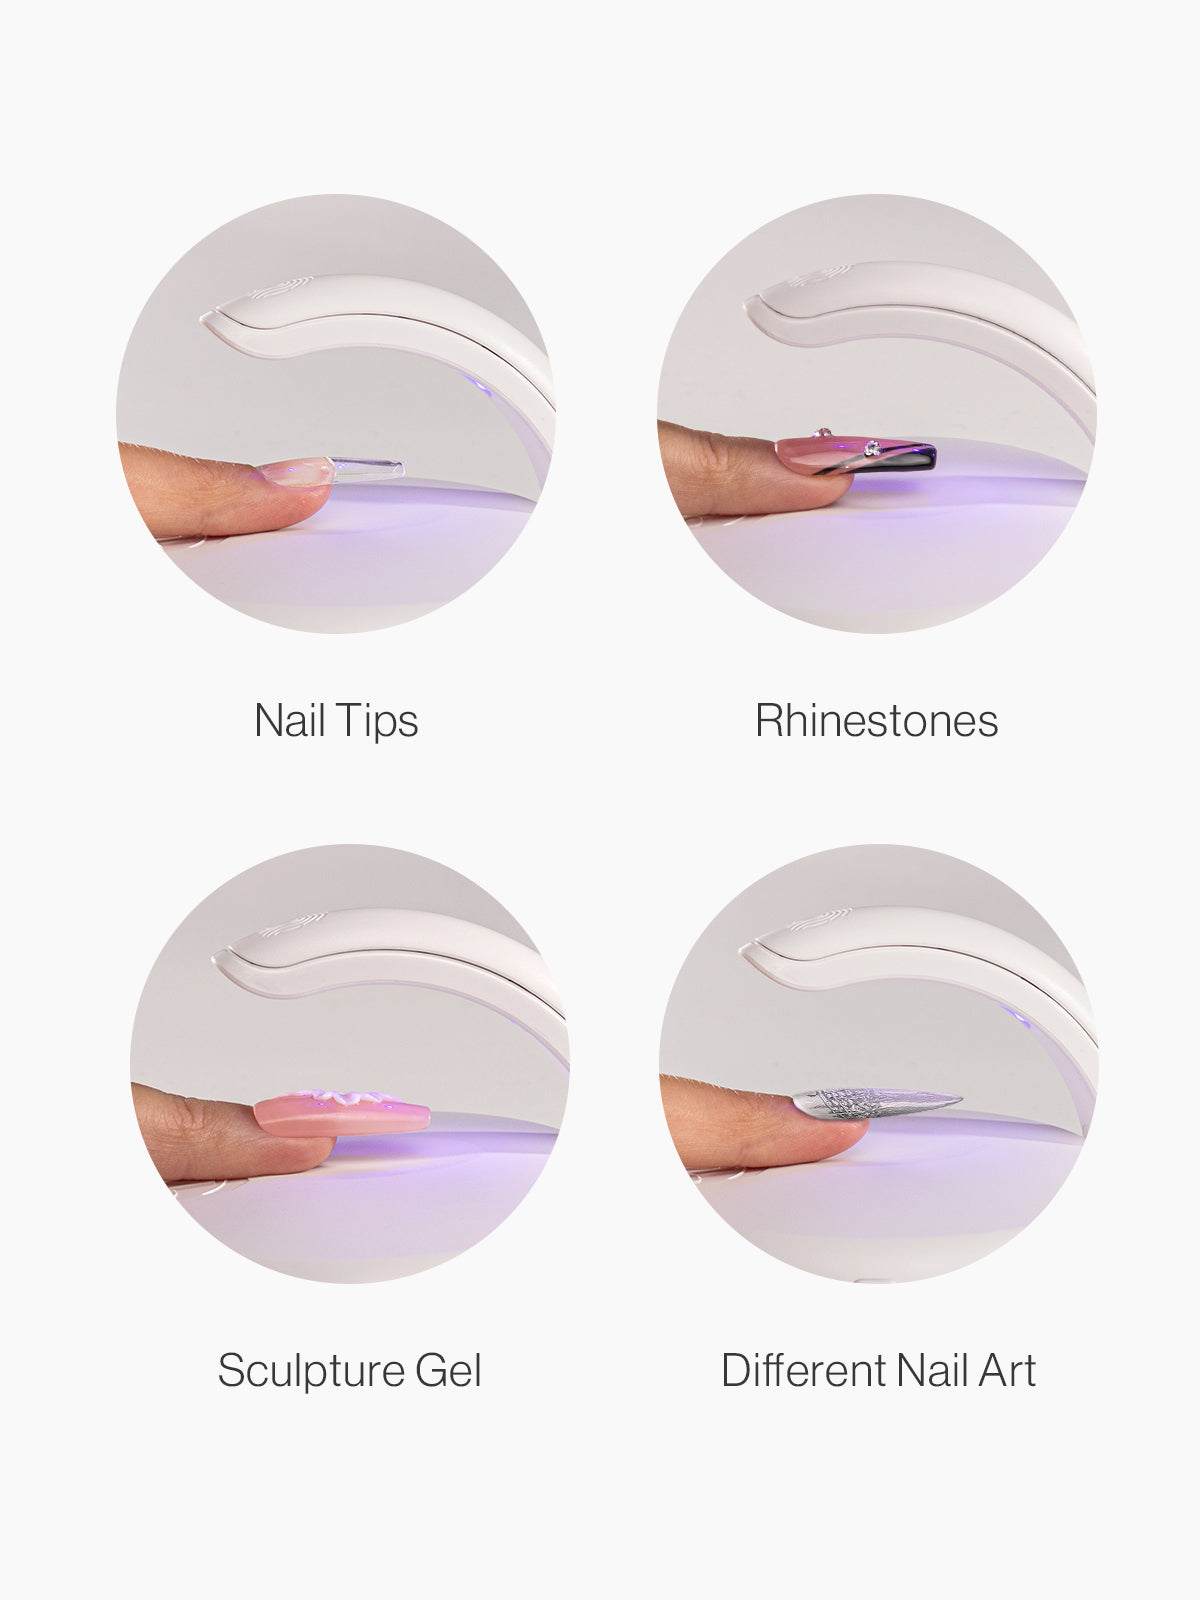 Rechargeable Mini 2 in 1 LED/UV Nail Art Lamp can curing nail tips, rhinestones, scuplture gels